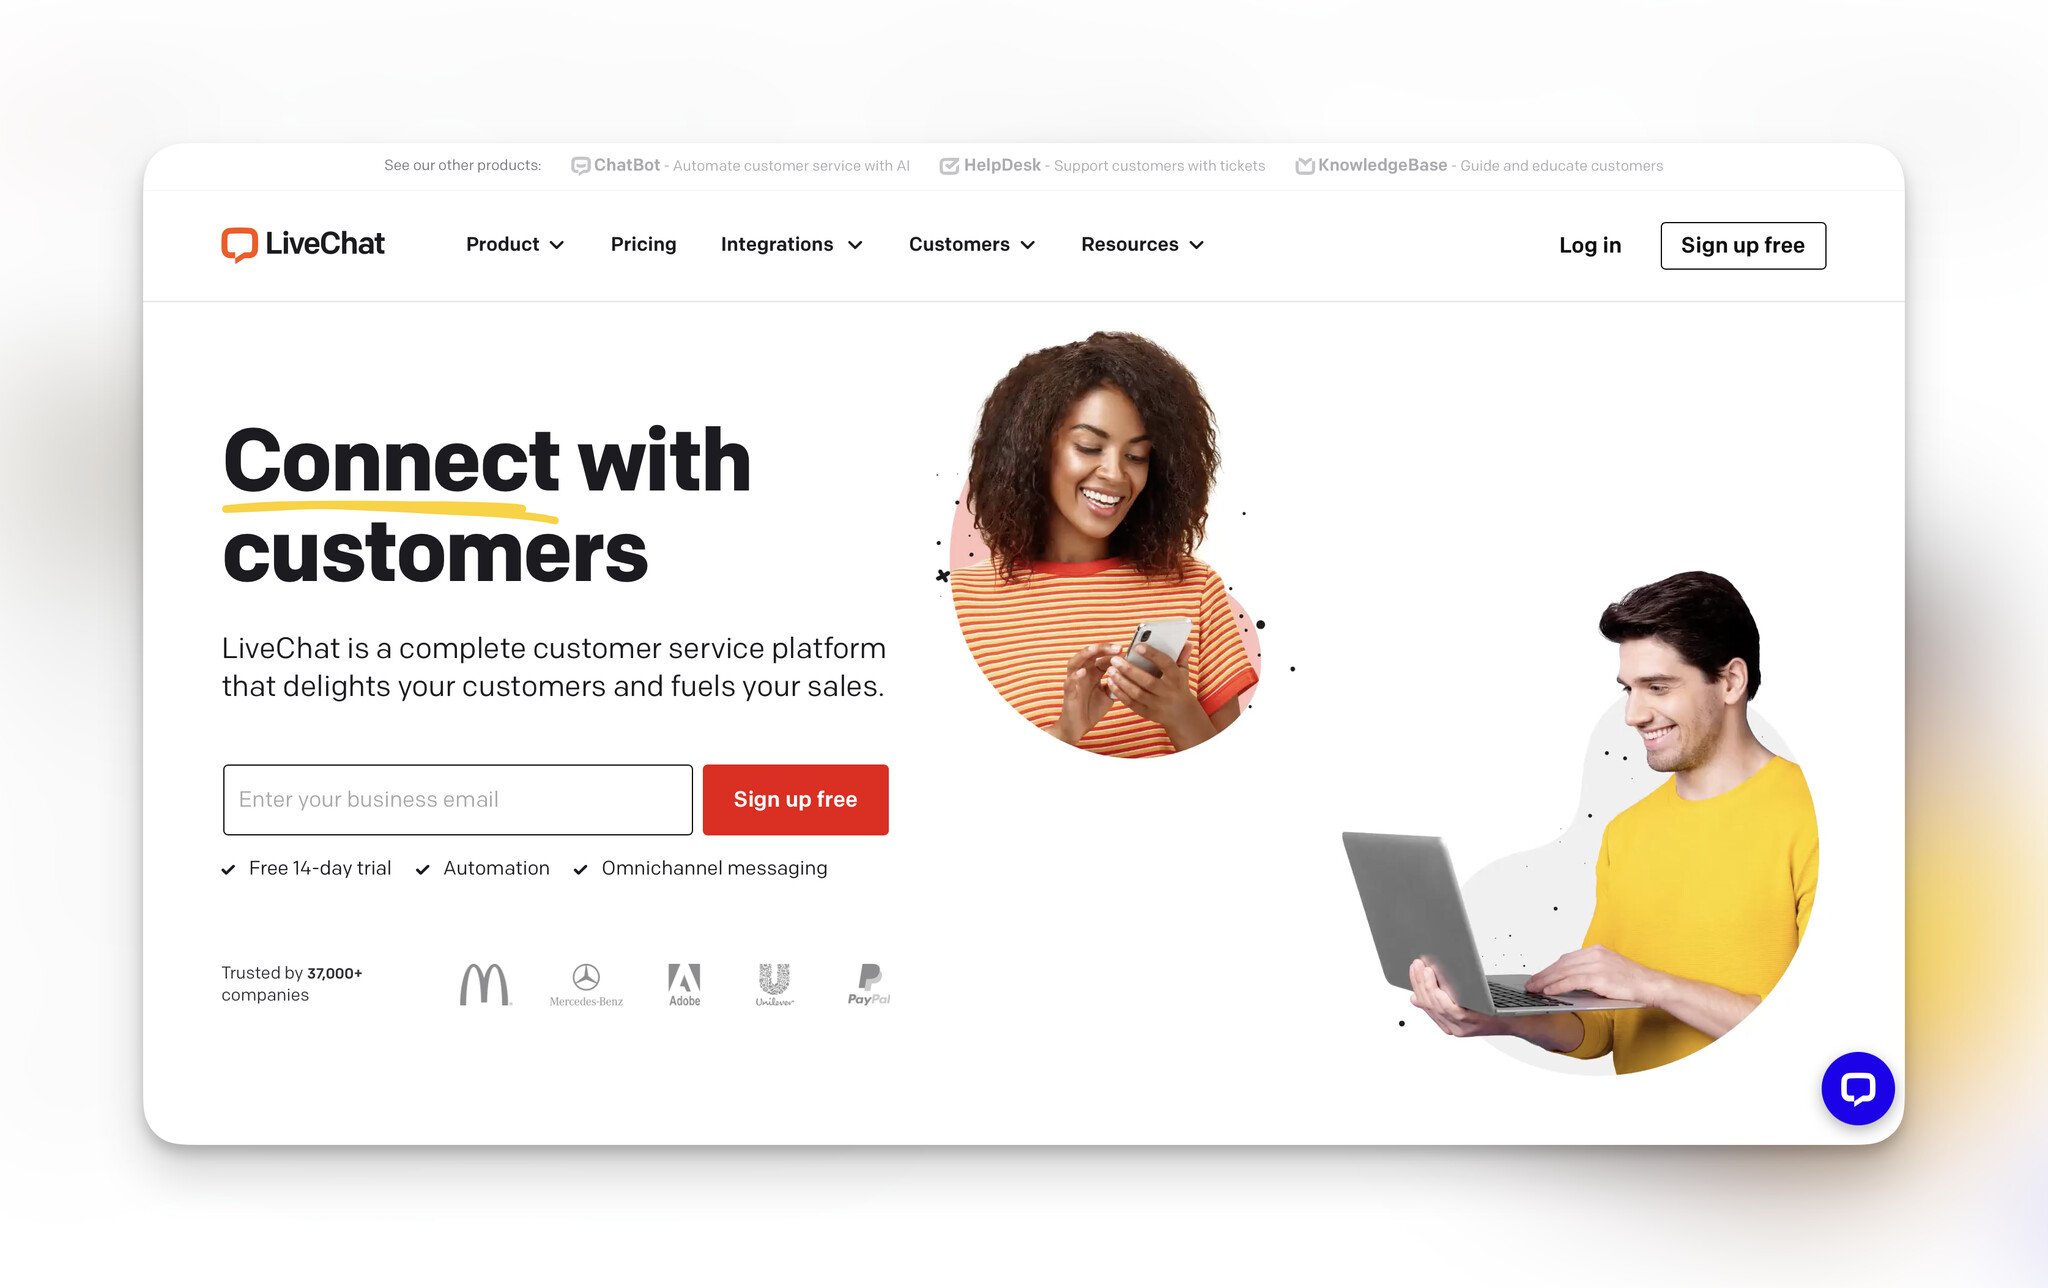 LiveChat's homepage with the headline "Connect with customers" followed by an e-mail field and on the right, there is an image of a female looking at her phone and a male looking at his laptop